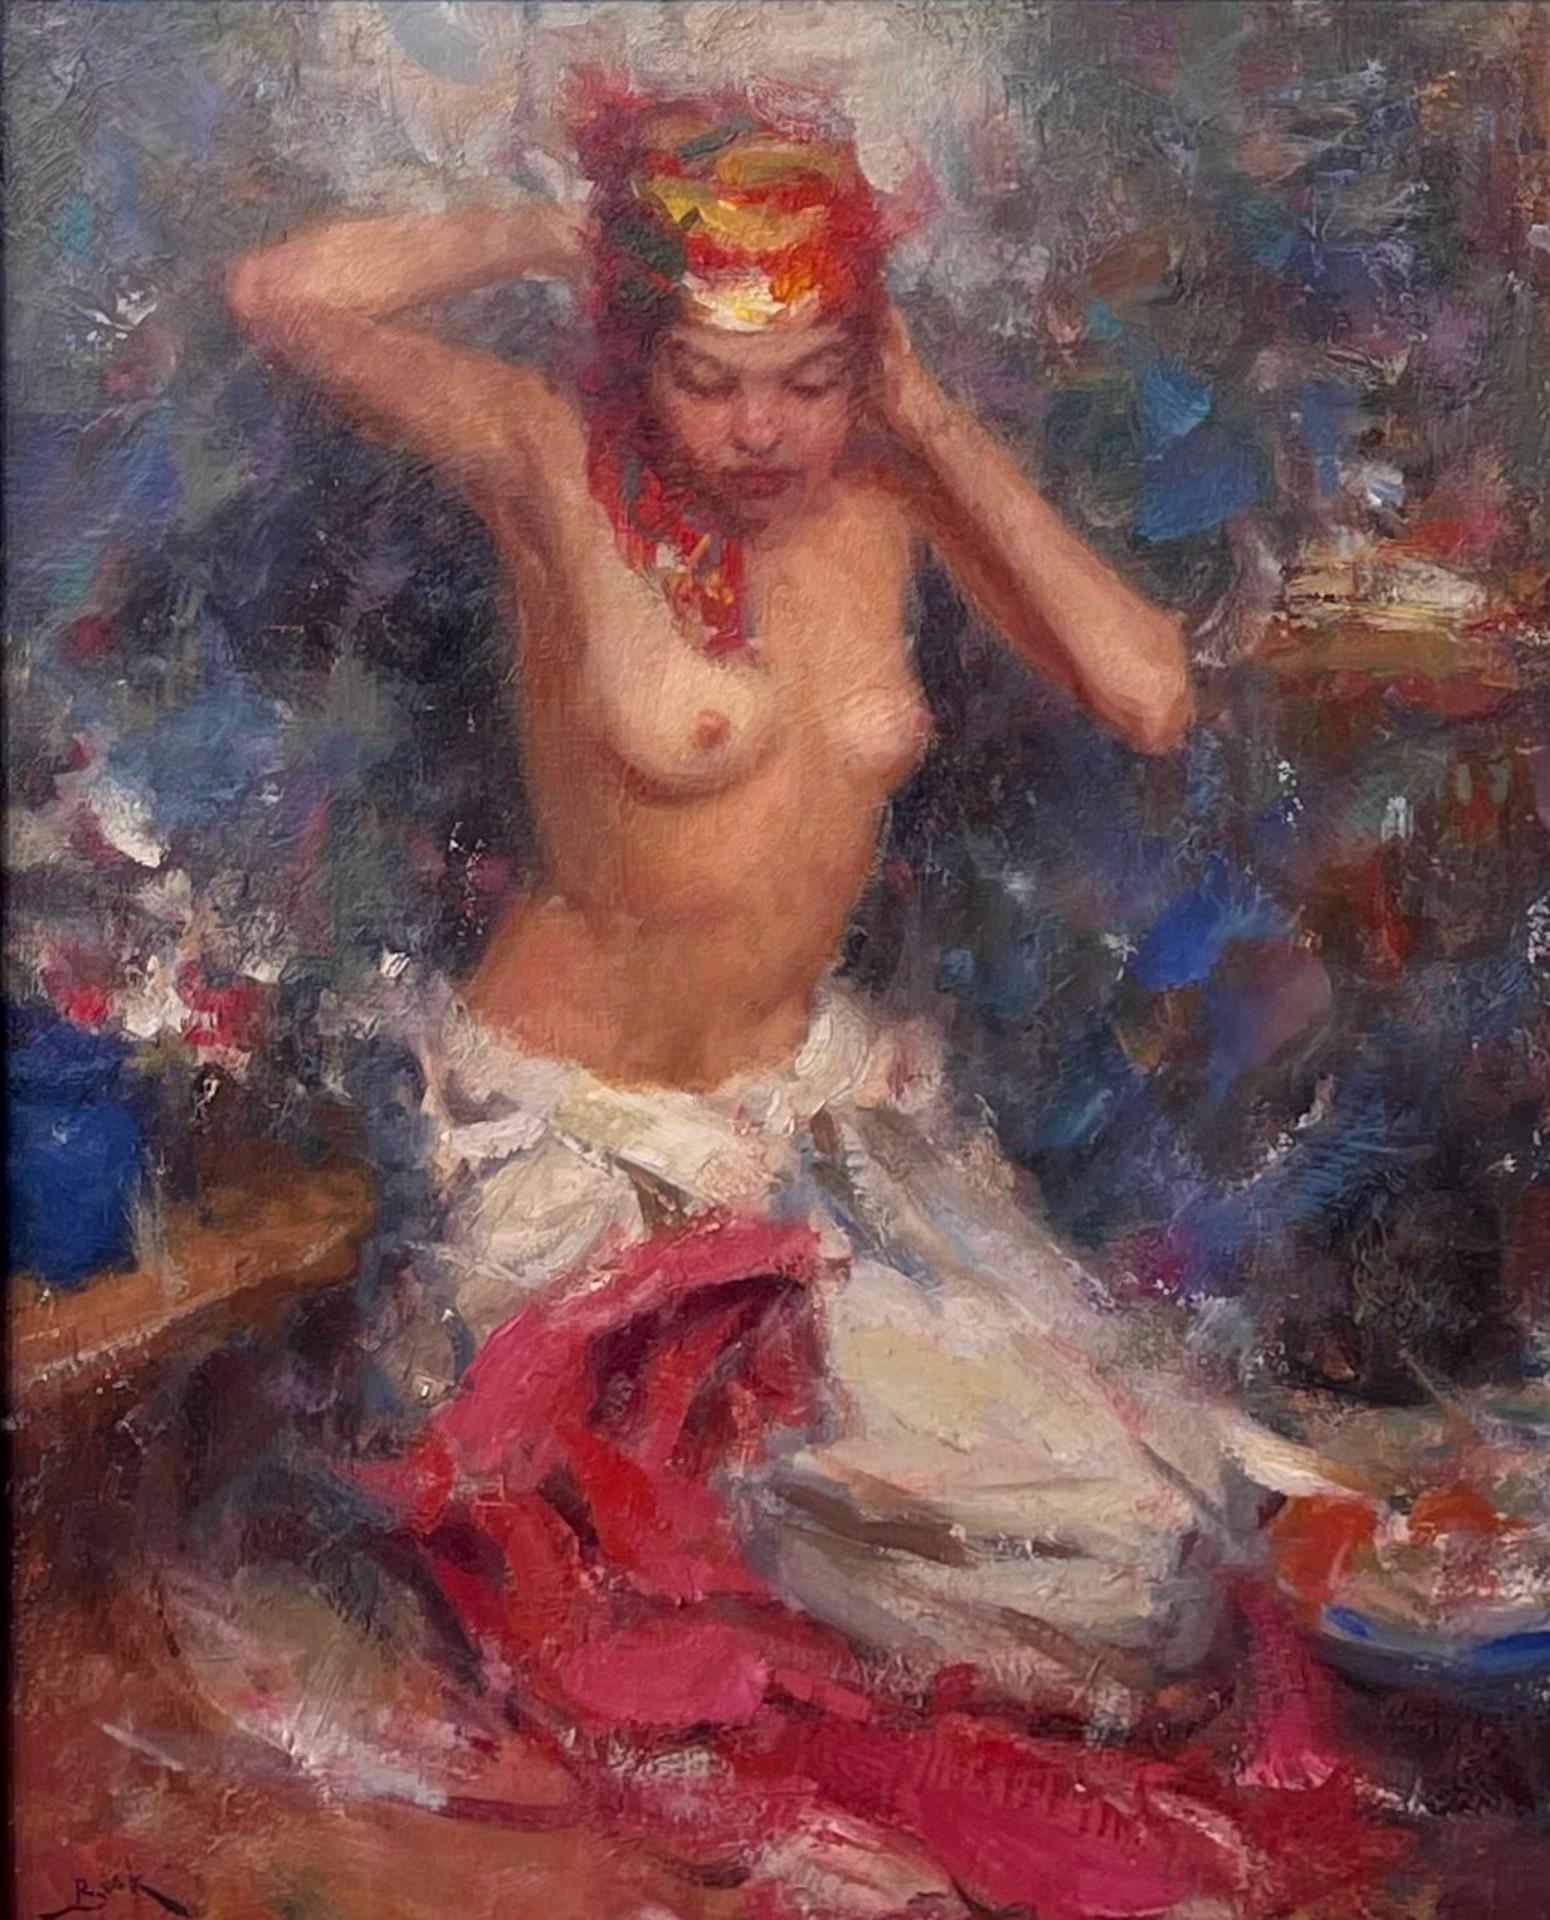 Dan Beck Nude Painting - Reds and Blues